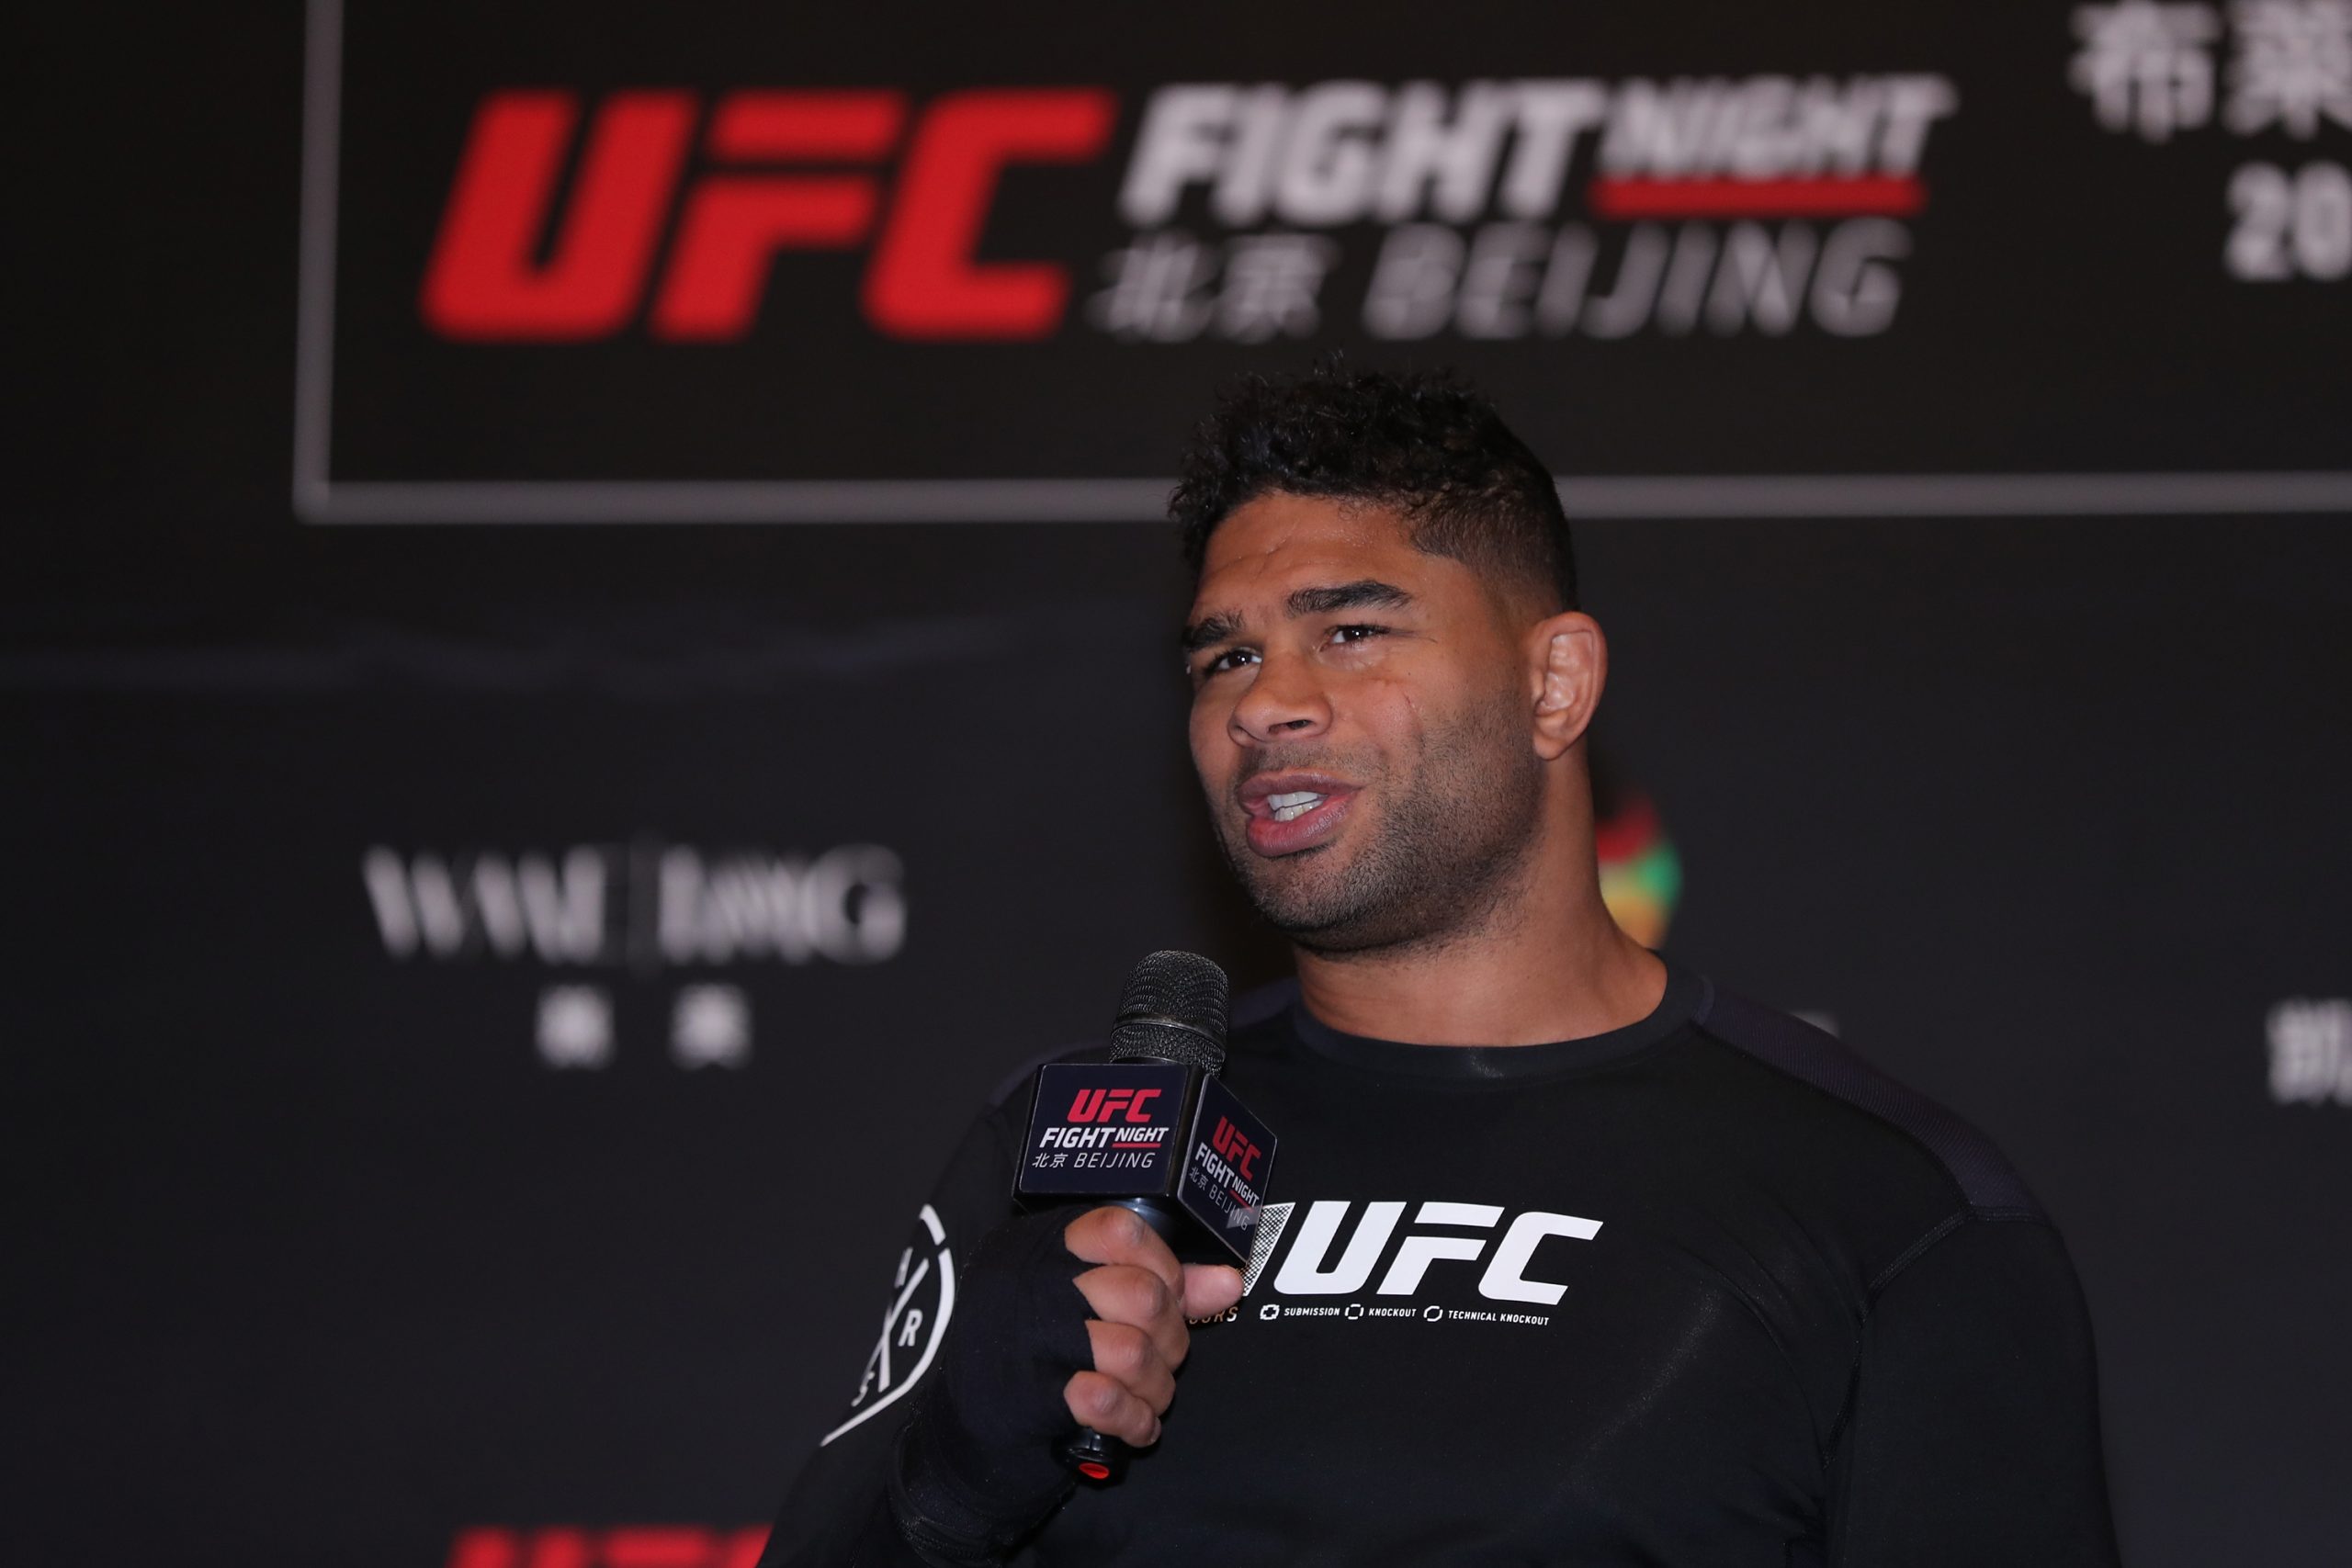 Alistair Overeem is one of the top stars in the UFC